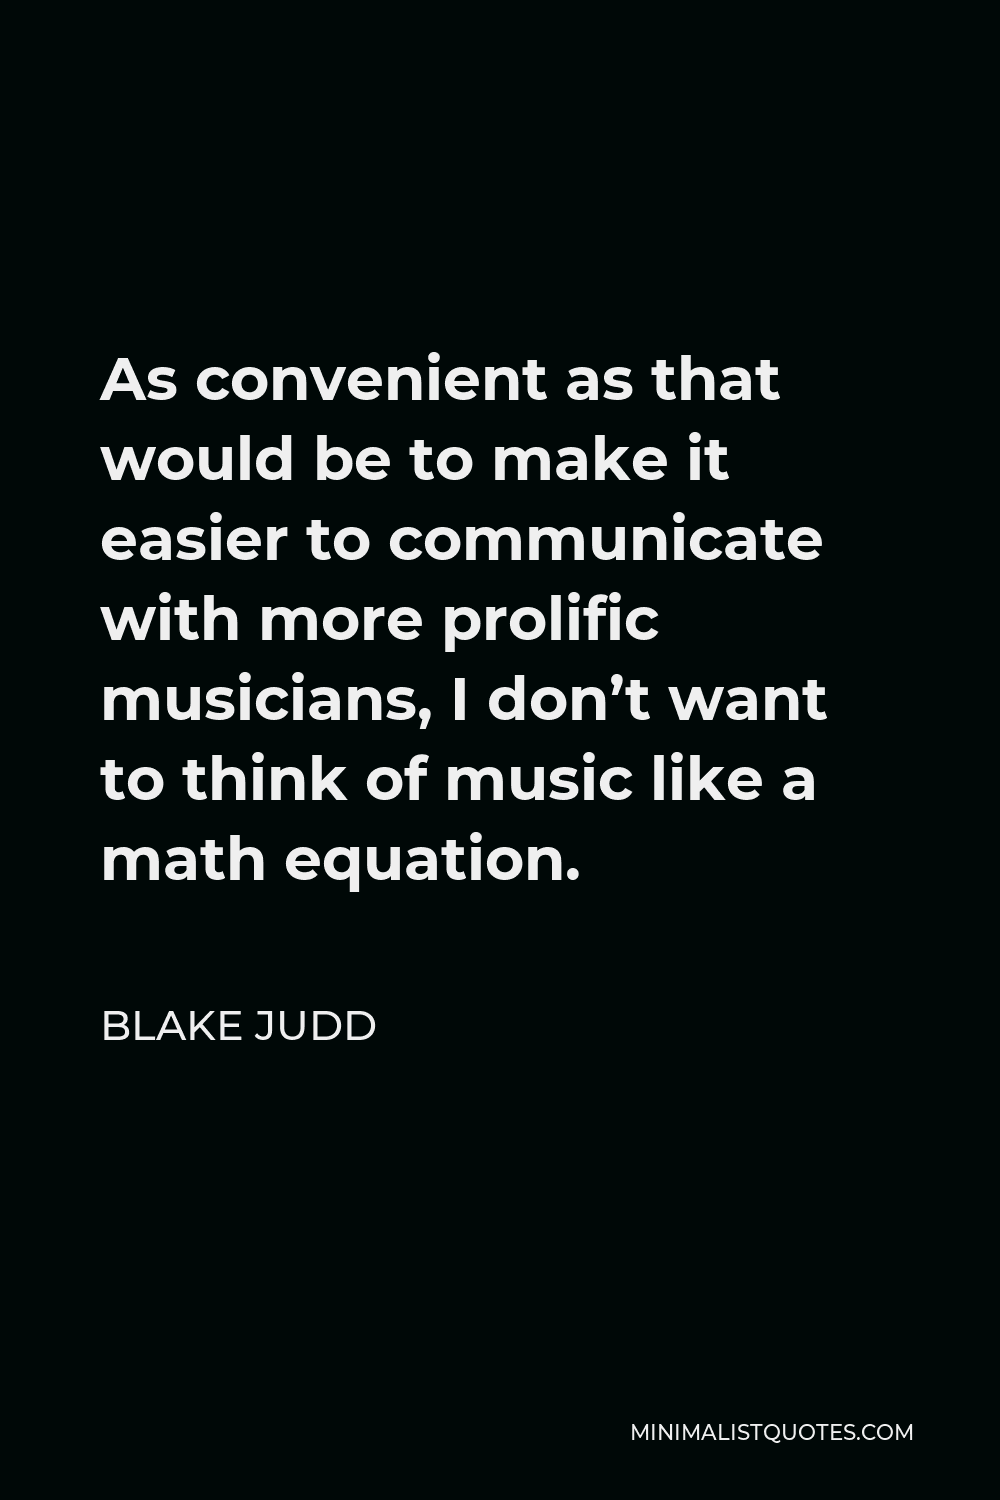 Blake Judd Quote - As convenient as that would be to make it easier to communicate with more prolific musicians, I don’t want to think of music like a math equation.